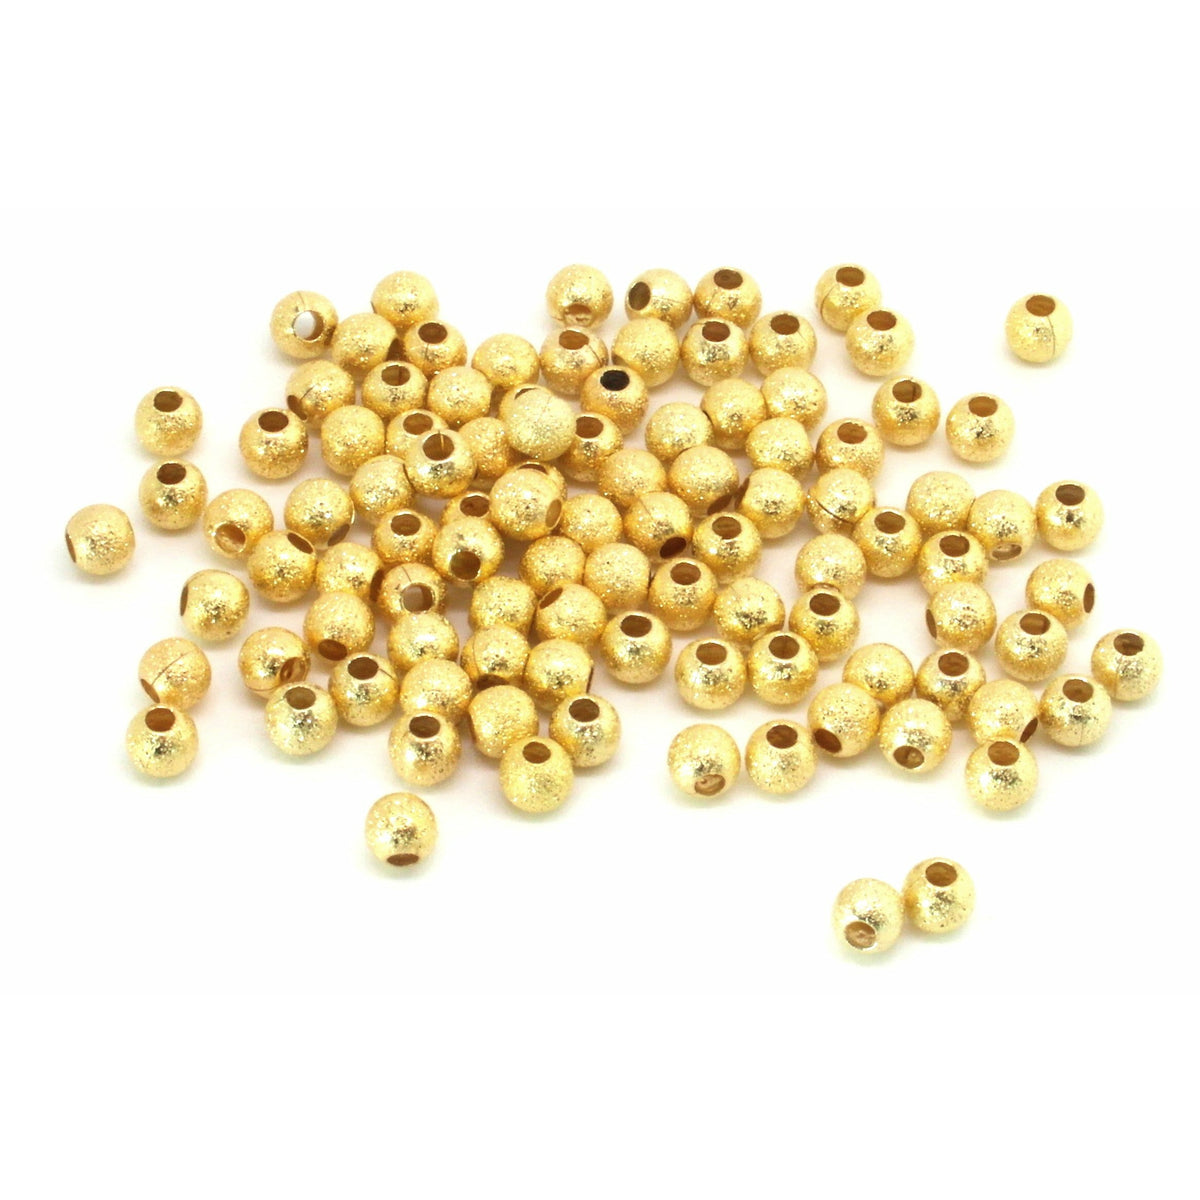 120pcs Sparkle Beads 6 Colors Stardust Beads 8mm Round Matte Glitter Beads  Christmas Sparkle Loose Beads 